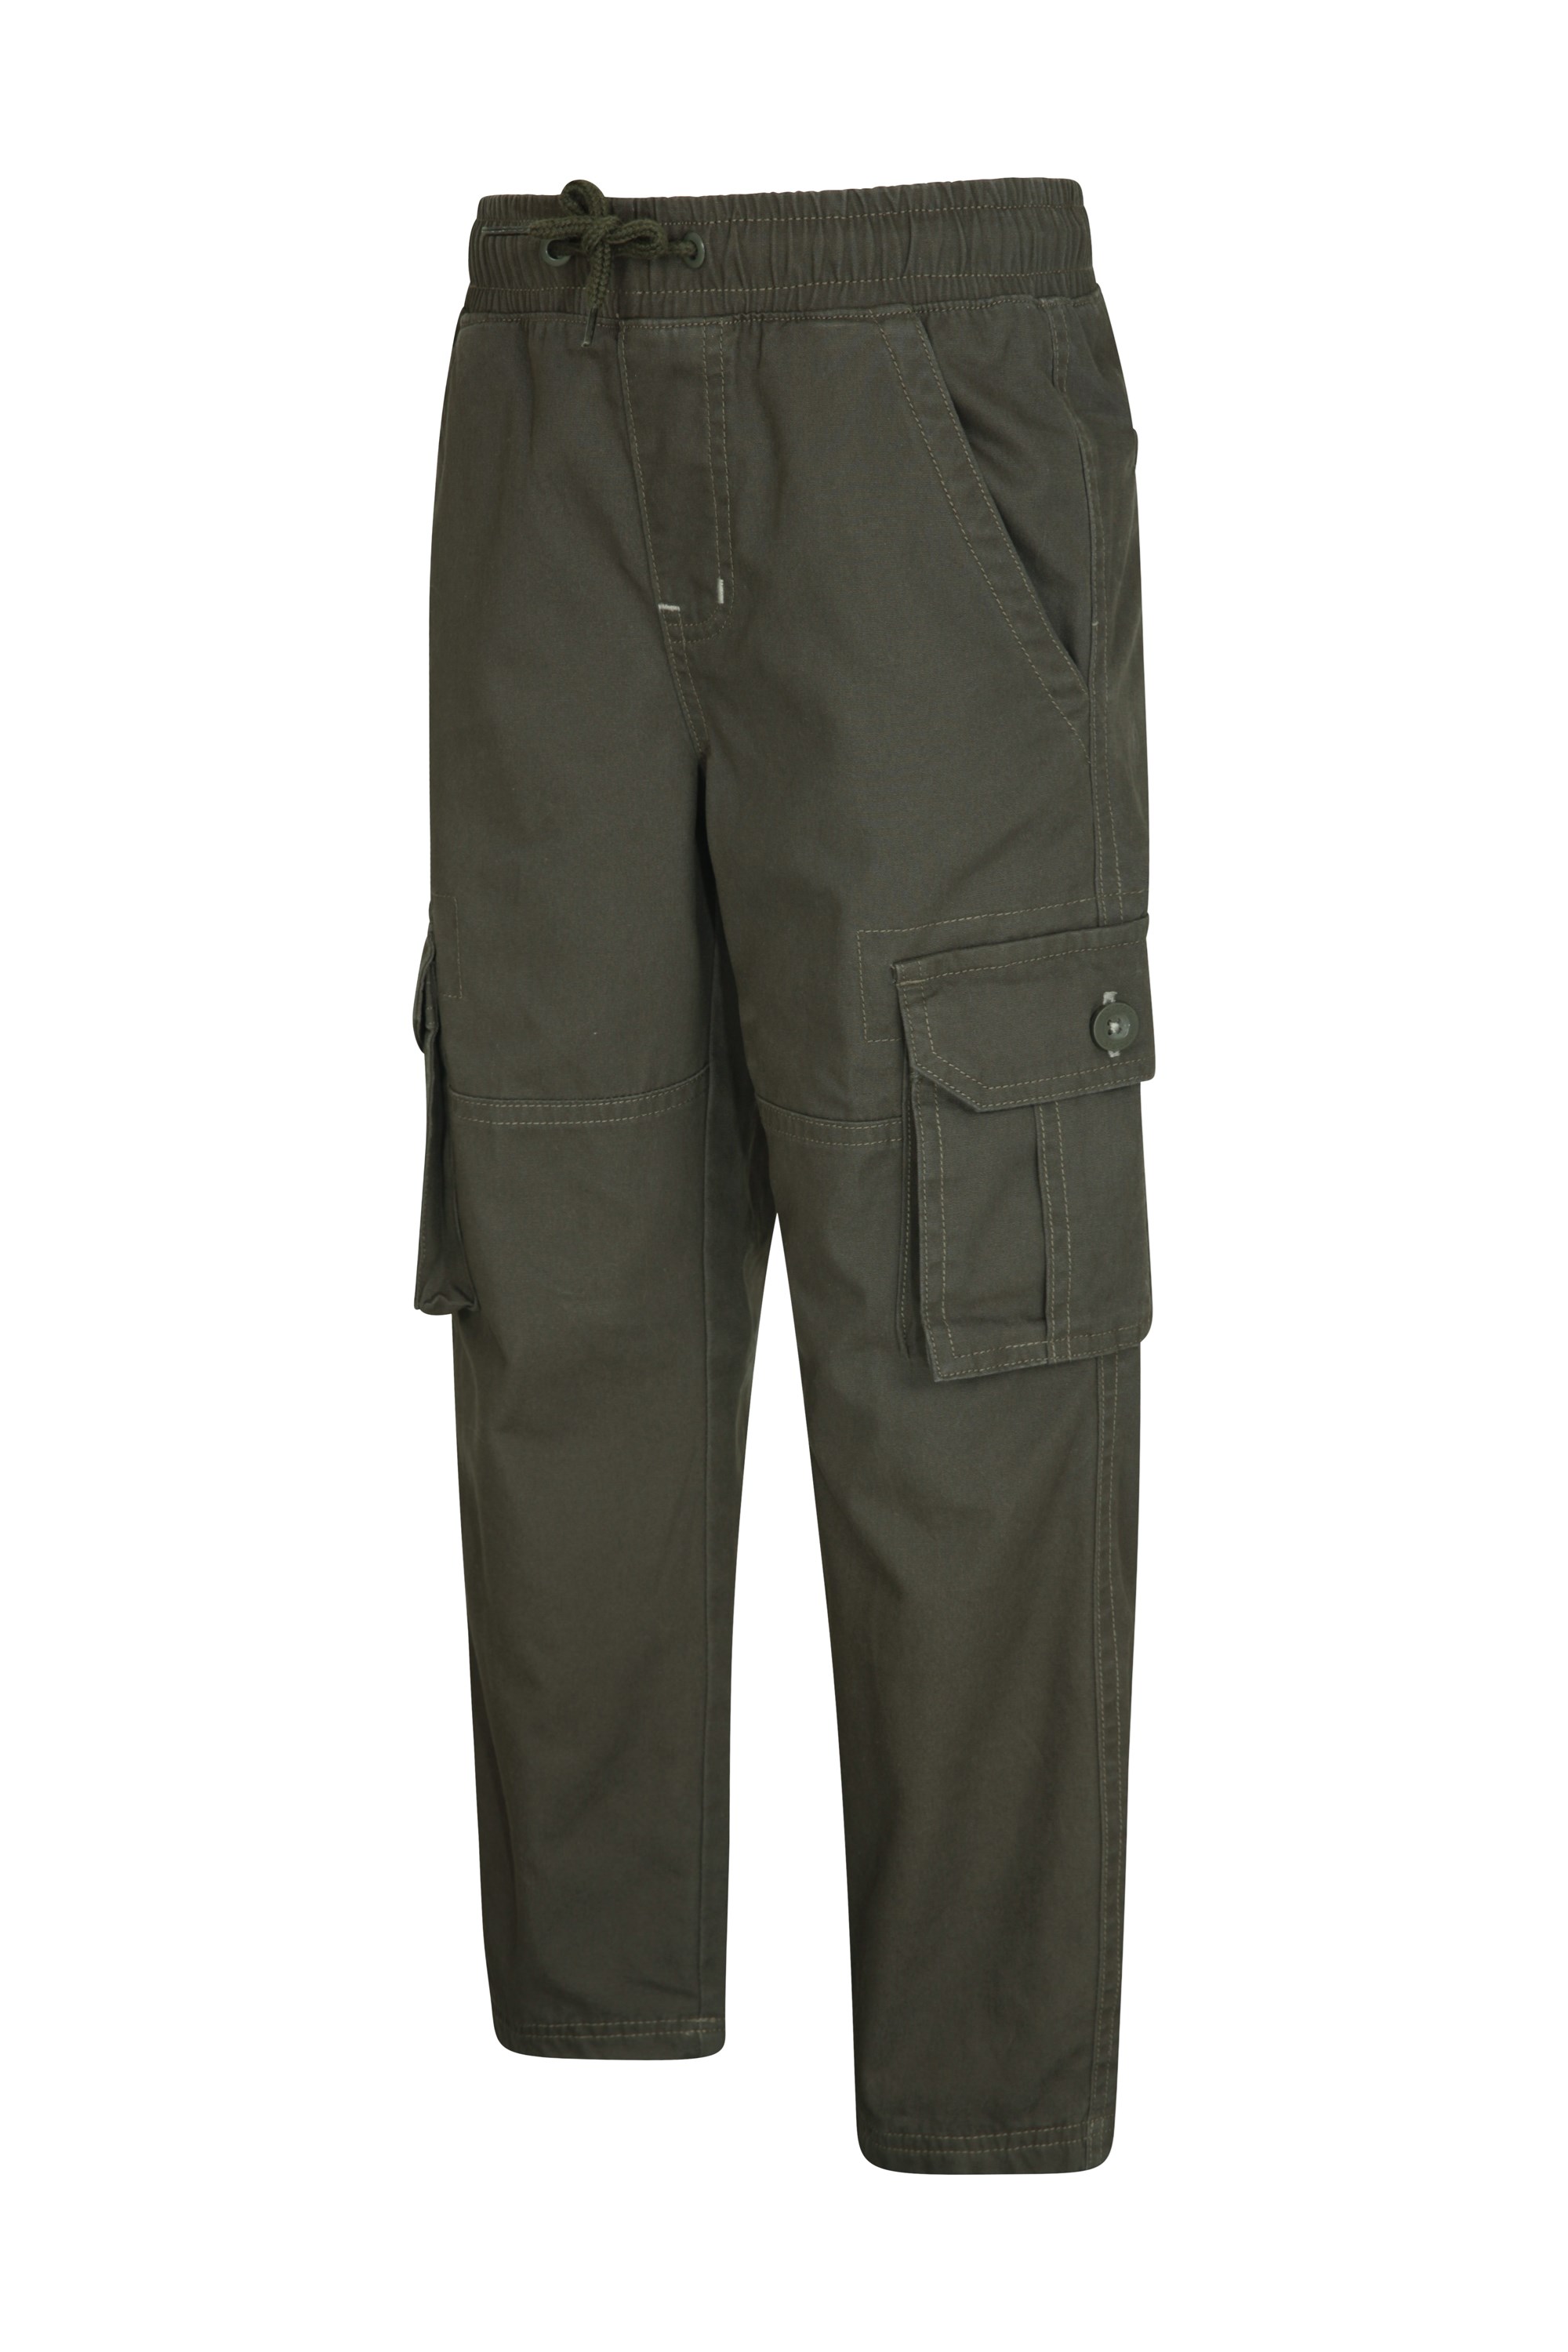 Mountain Warehouse Pull Up Kids Jersey Lined Cargo Pants - Green | Size 11-12